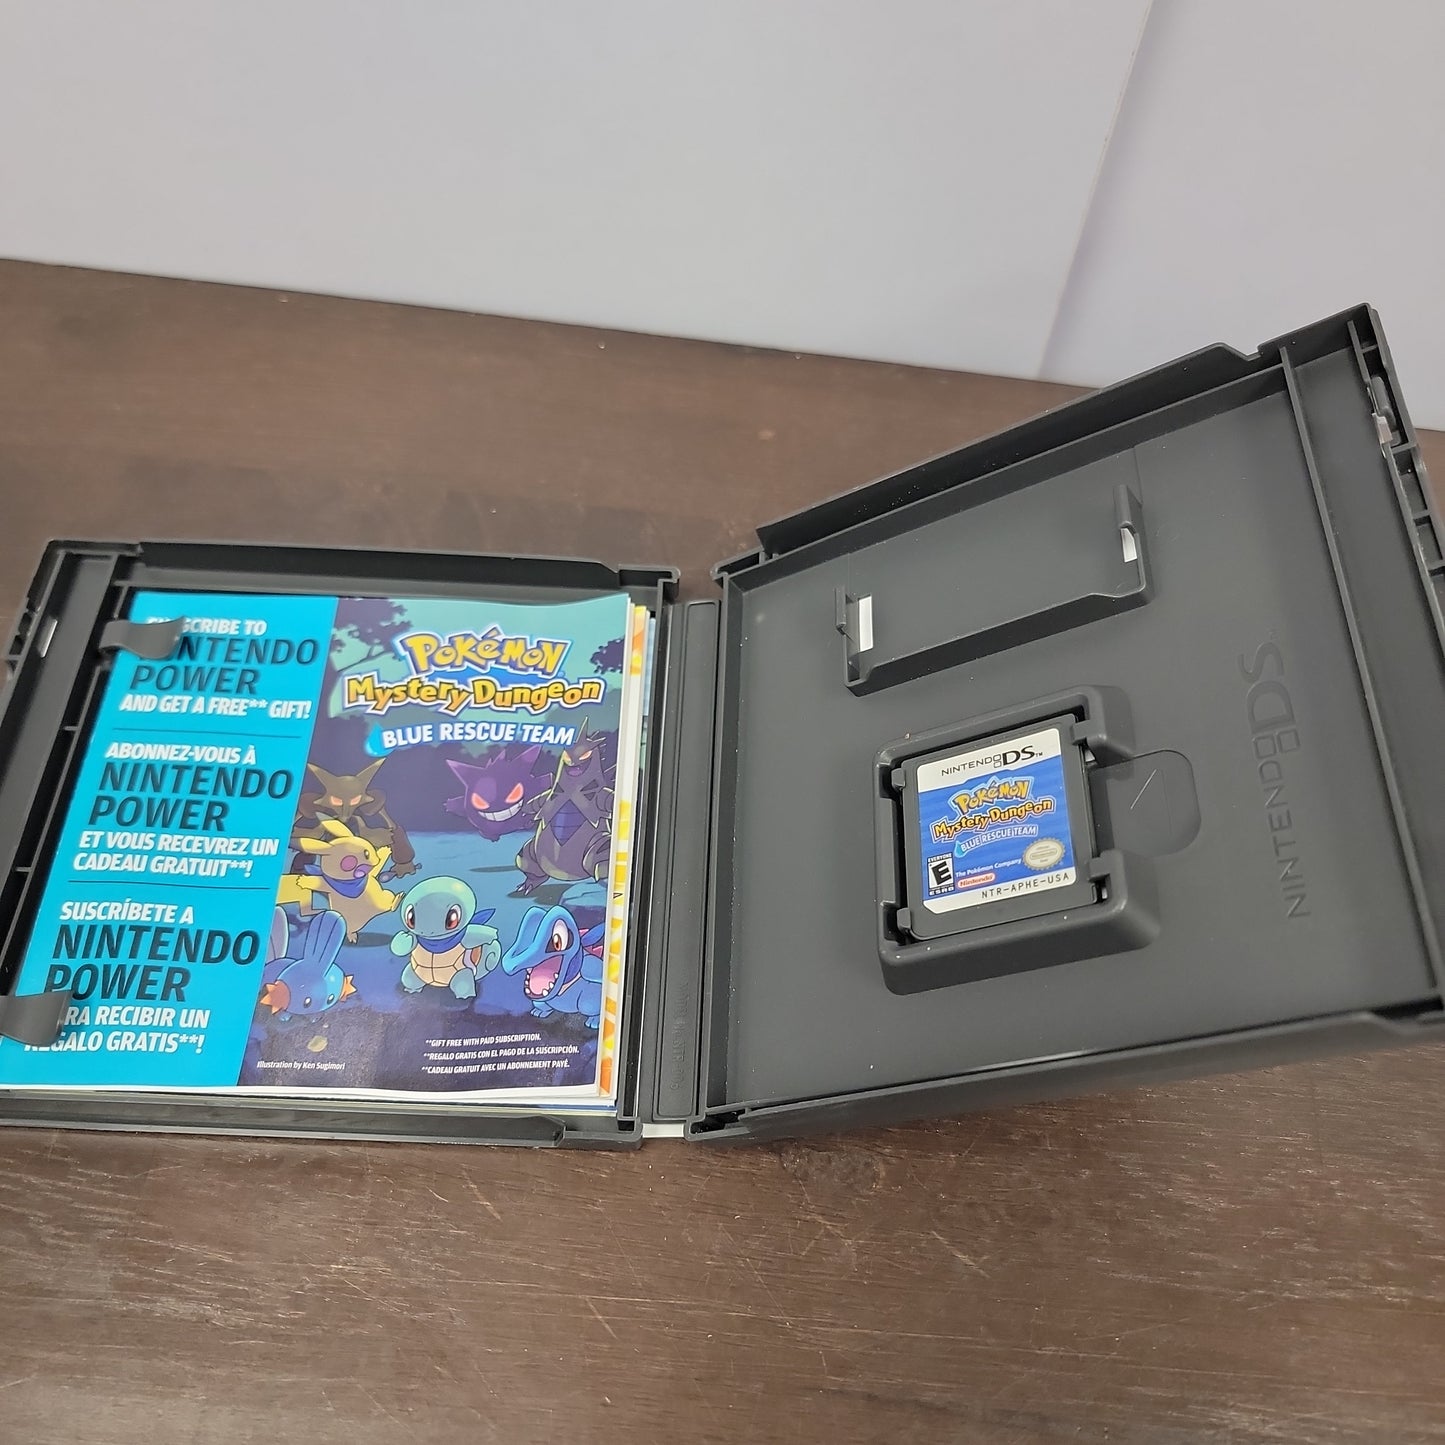 Pokemon Mystery Dungeon Blue Rescue Team  Nintendo DS Game